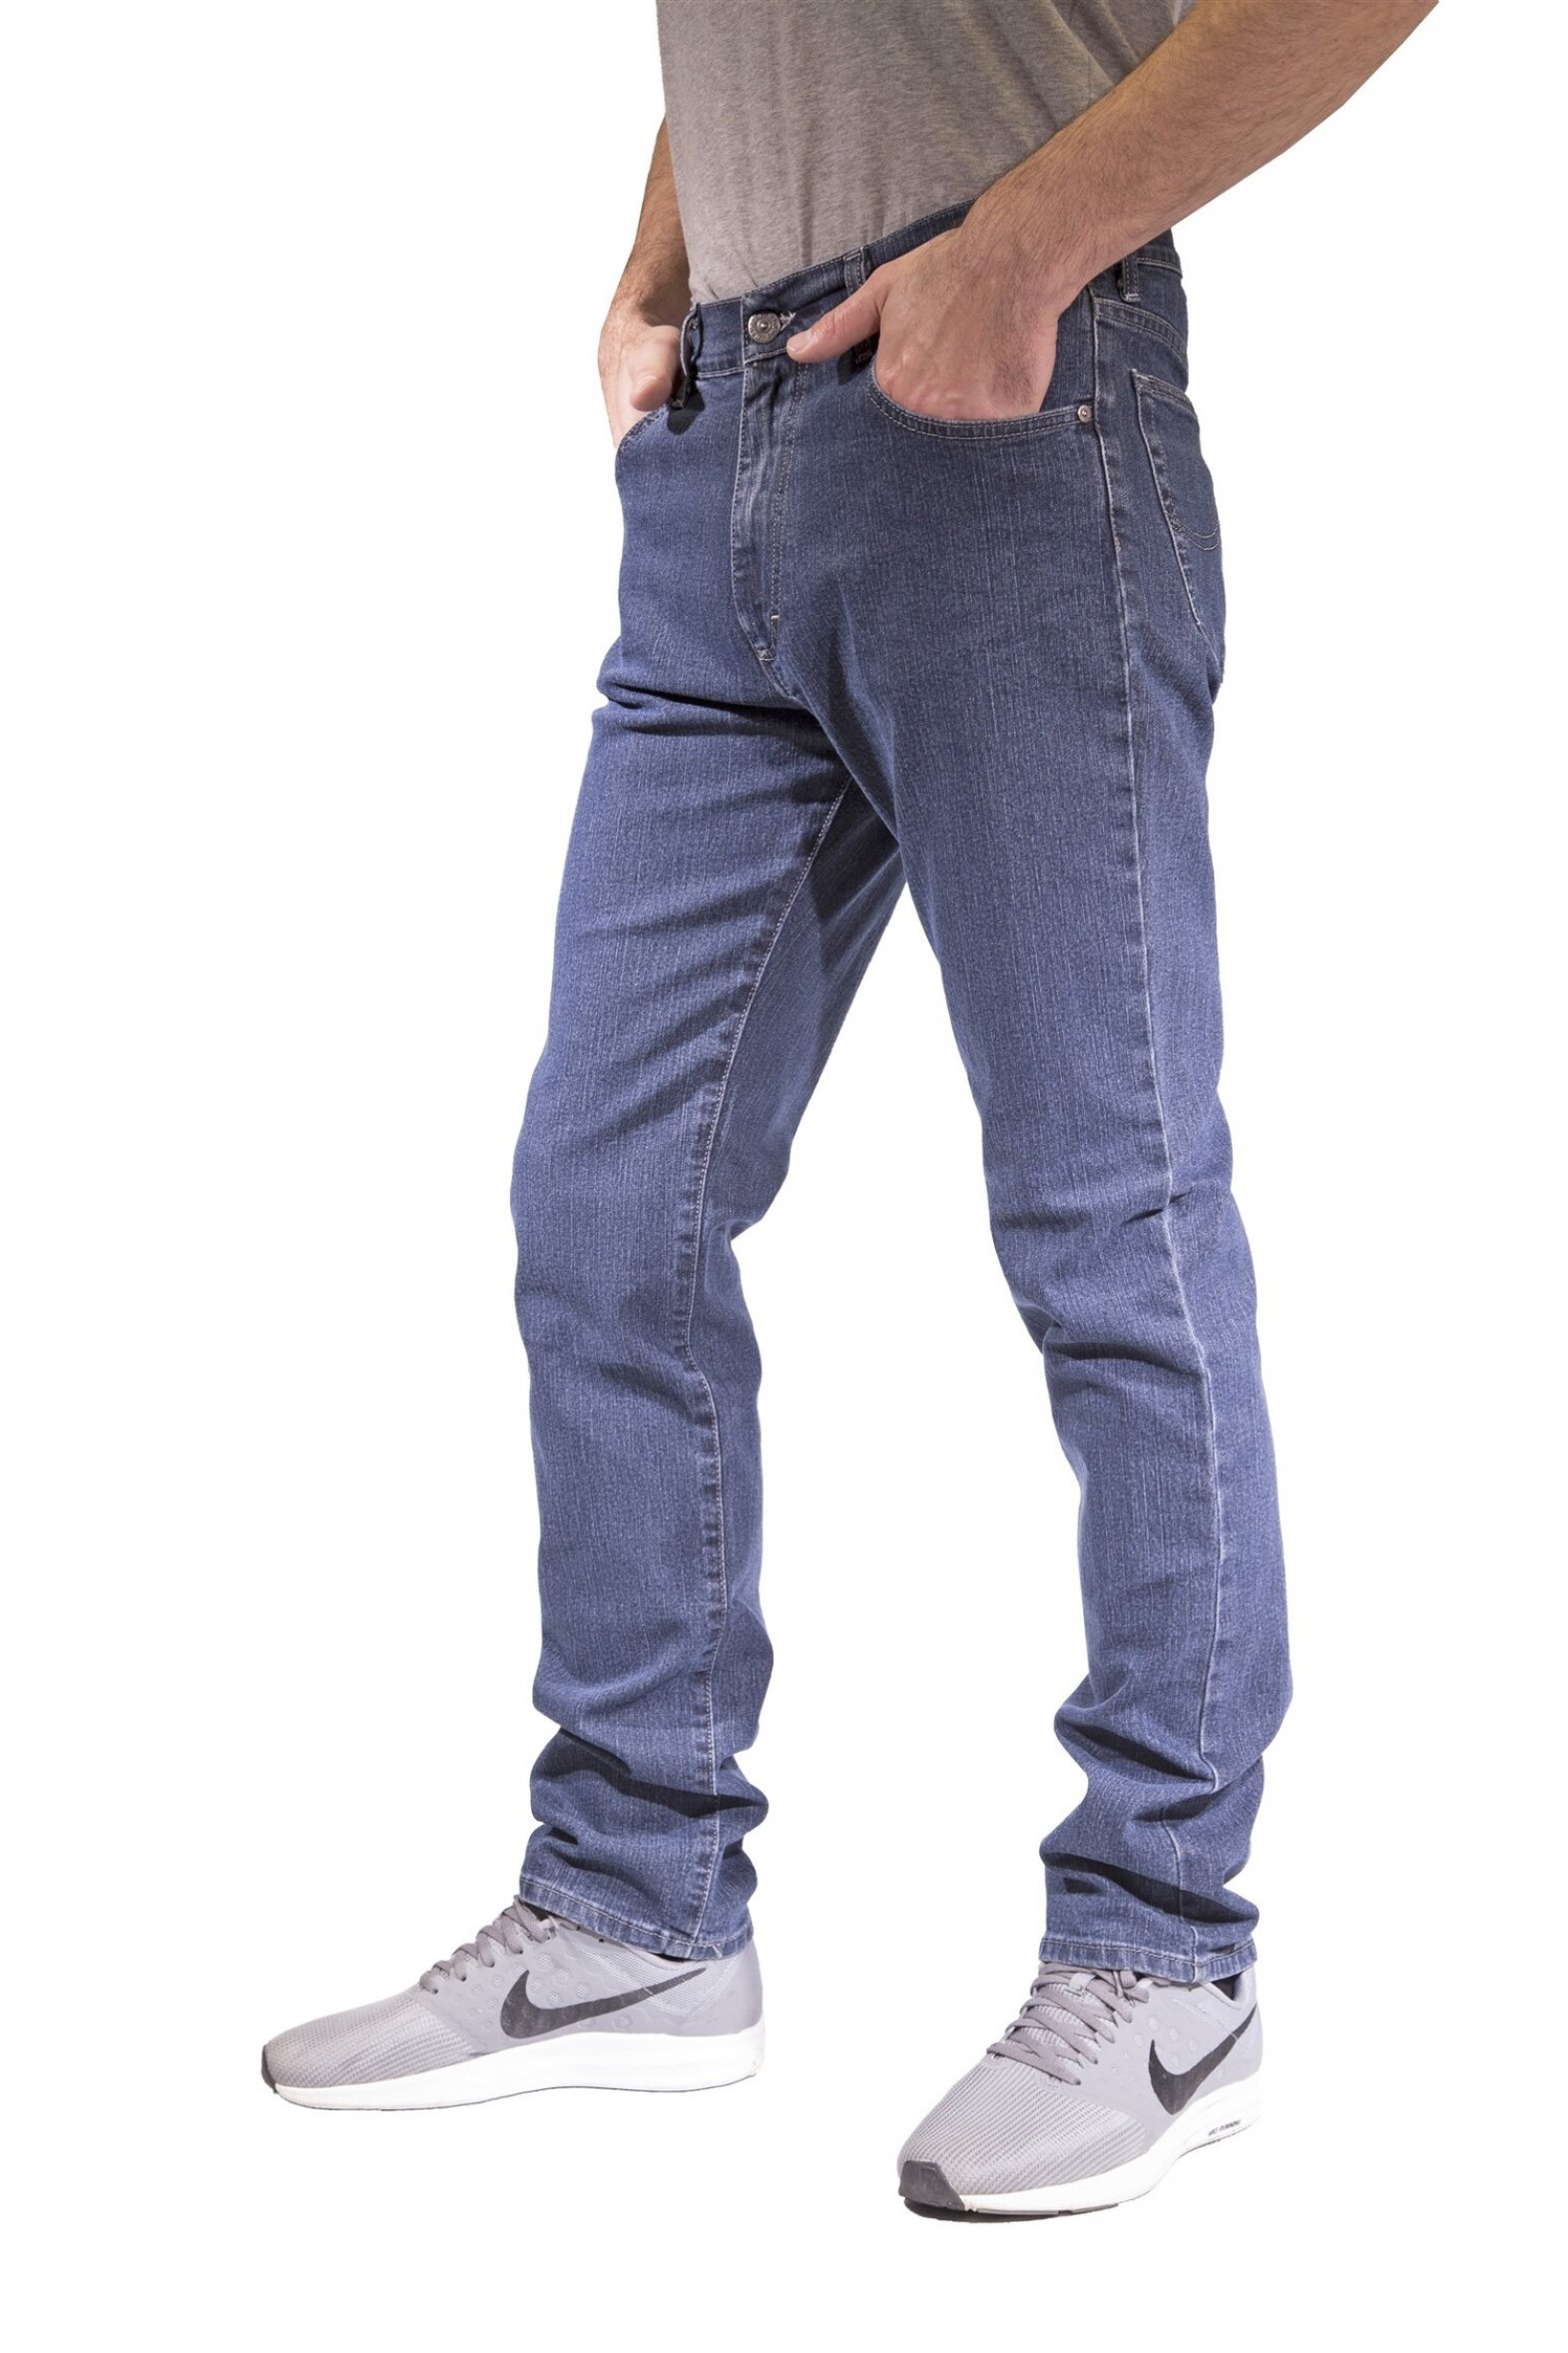 JEANS UOMO HOLIDAY CHAN STRETCH SCURO